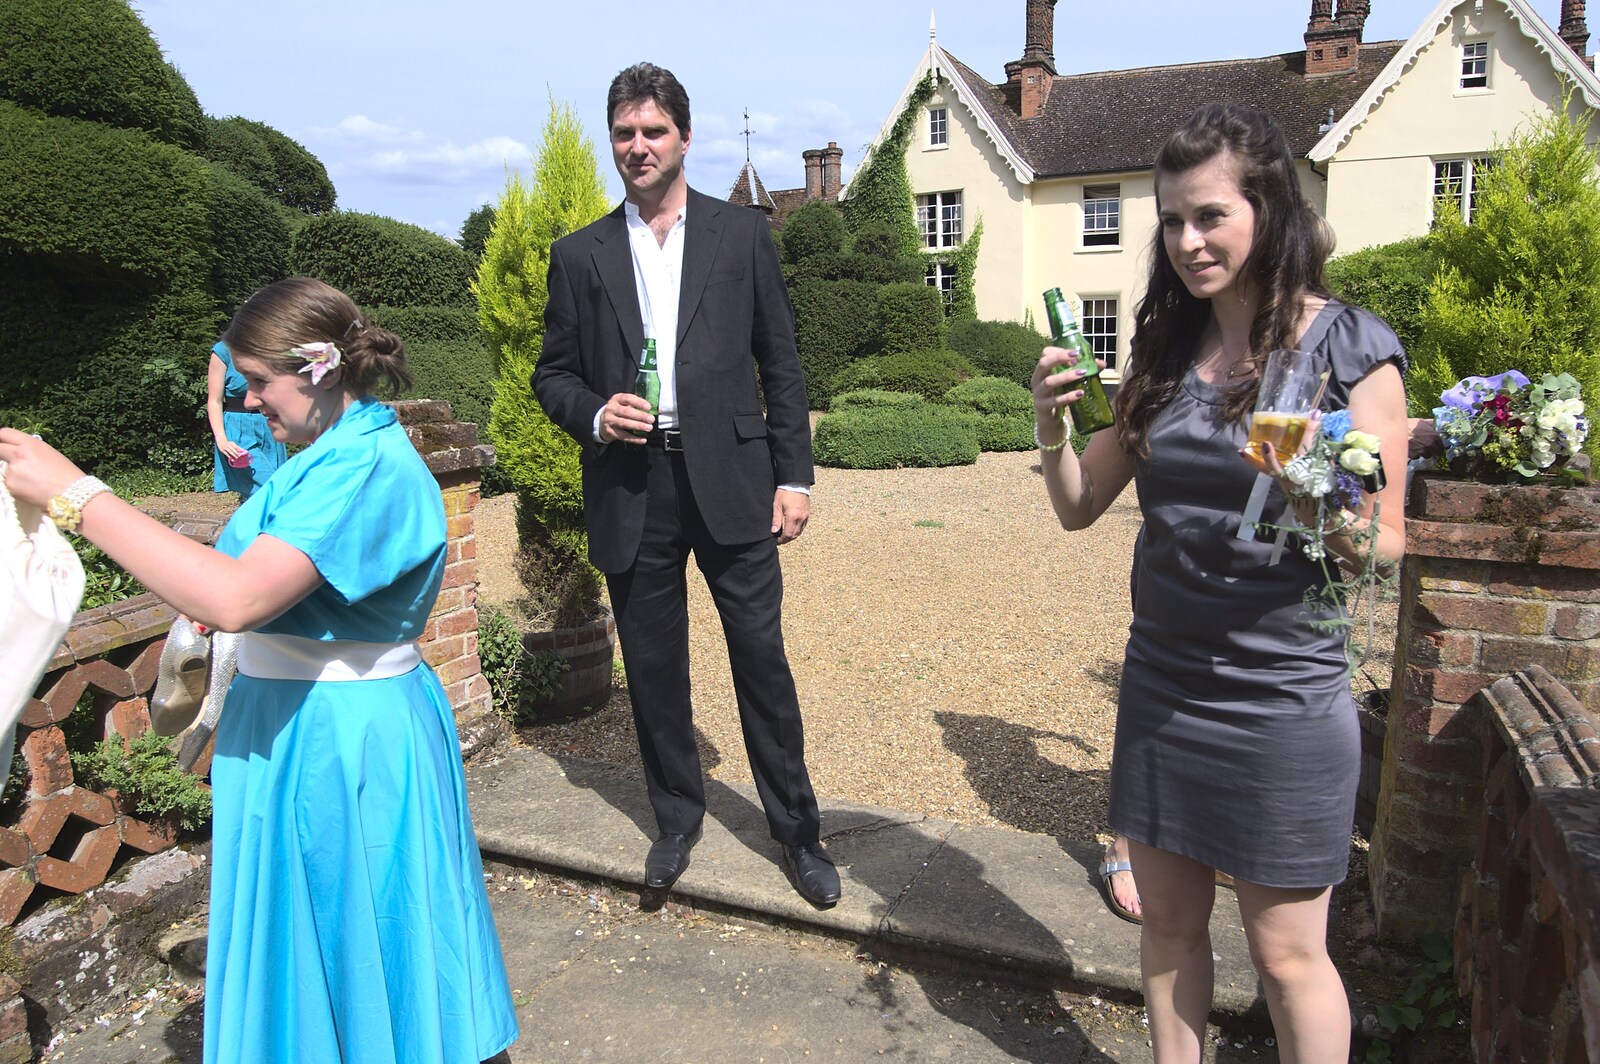 Sean and Jen have beers from Nosher and Isobel's Wedding, Brome, Suffolk - 3rd July 2010